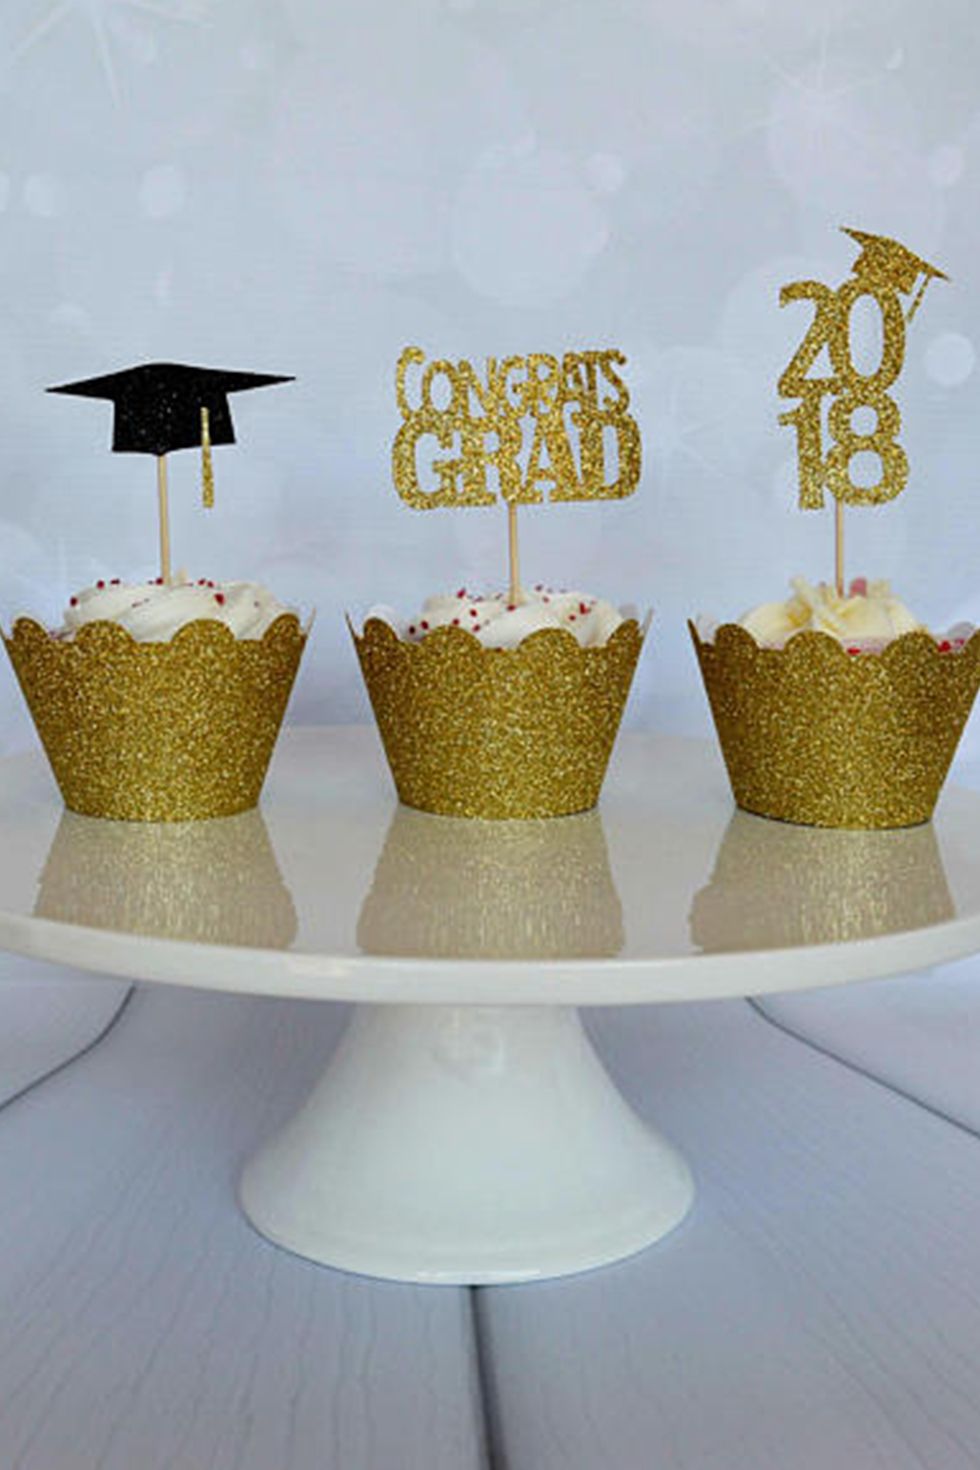 15 Easy Graduation Cake Ideas 2018 Decorations For High School And College Graduation Cakes